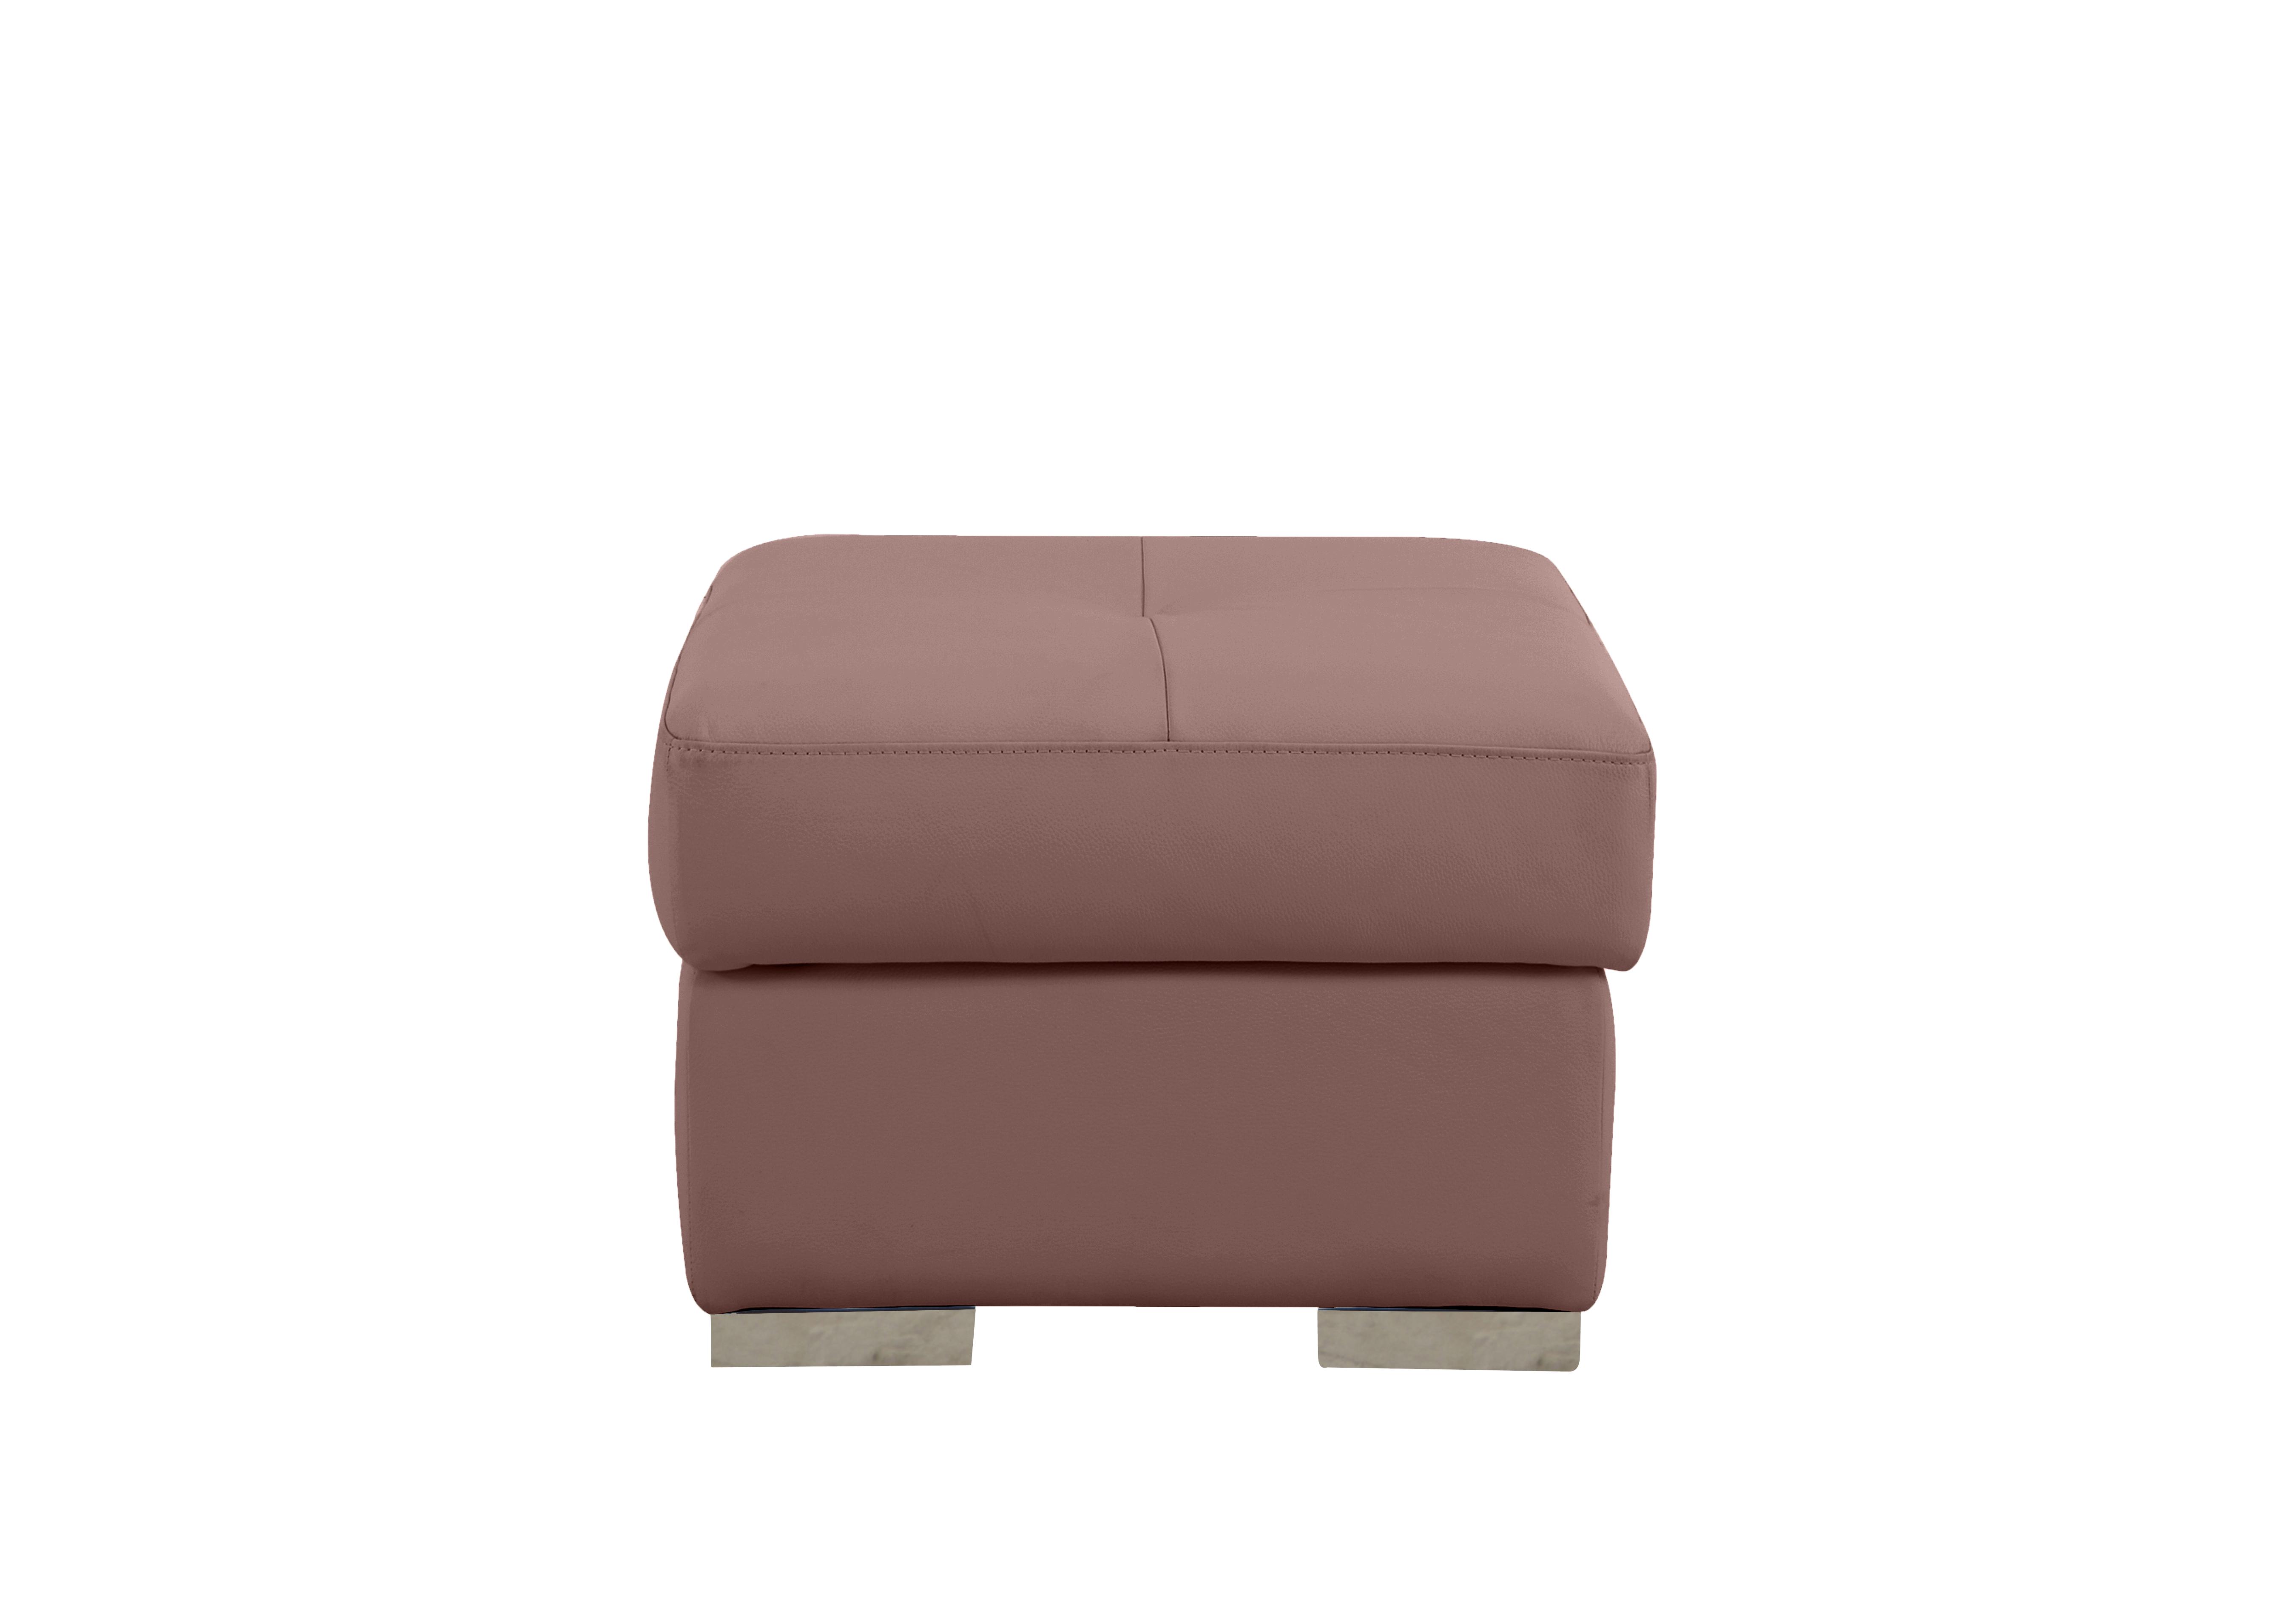 Galileo Leather Storage Footstool in Botero Cipria 2160 Ch on Furniture Village